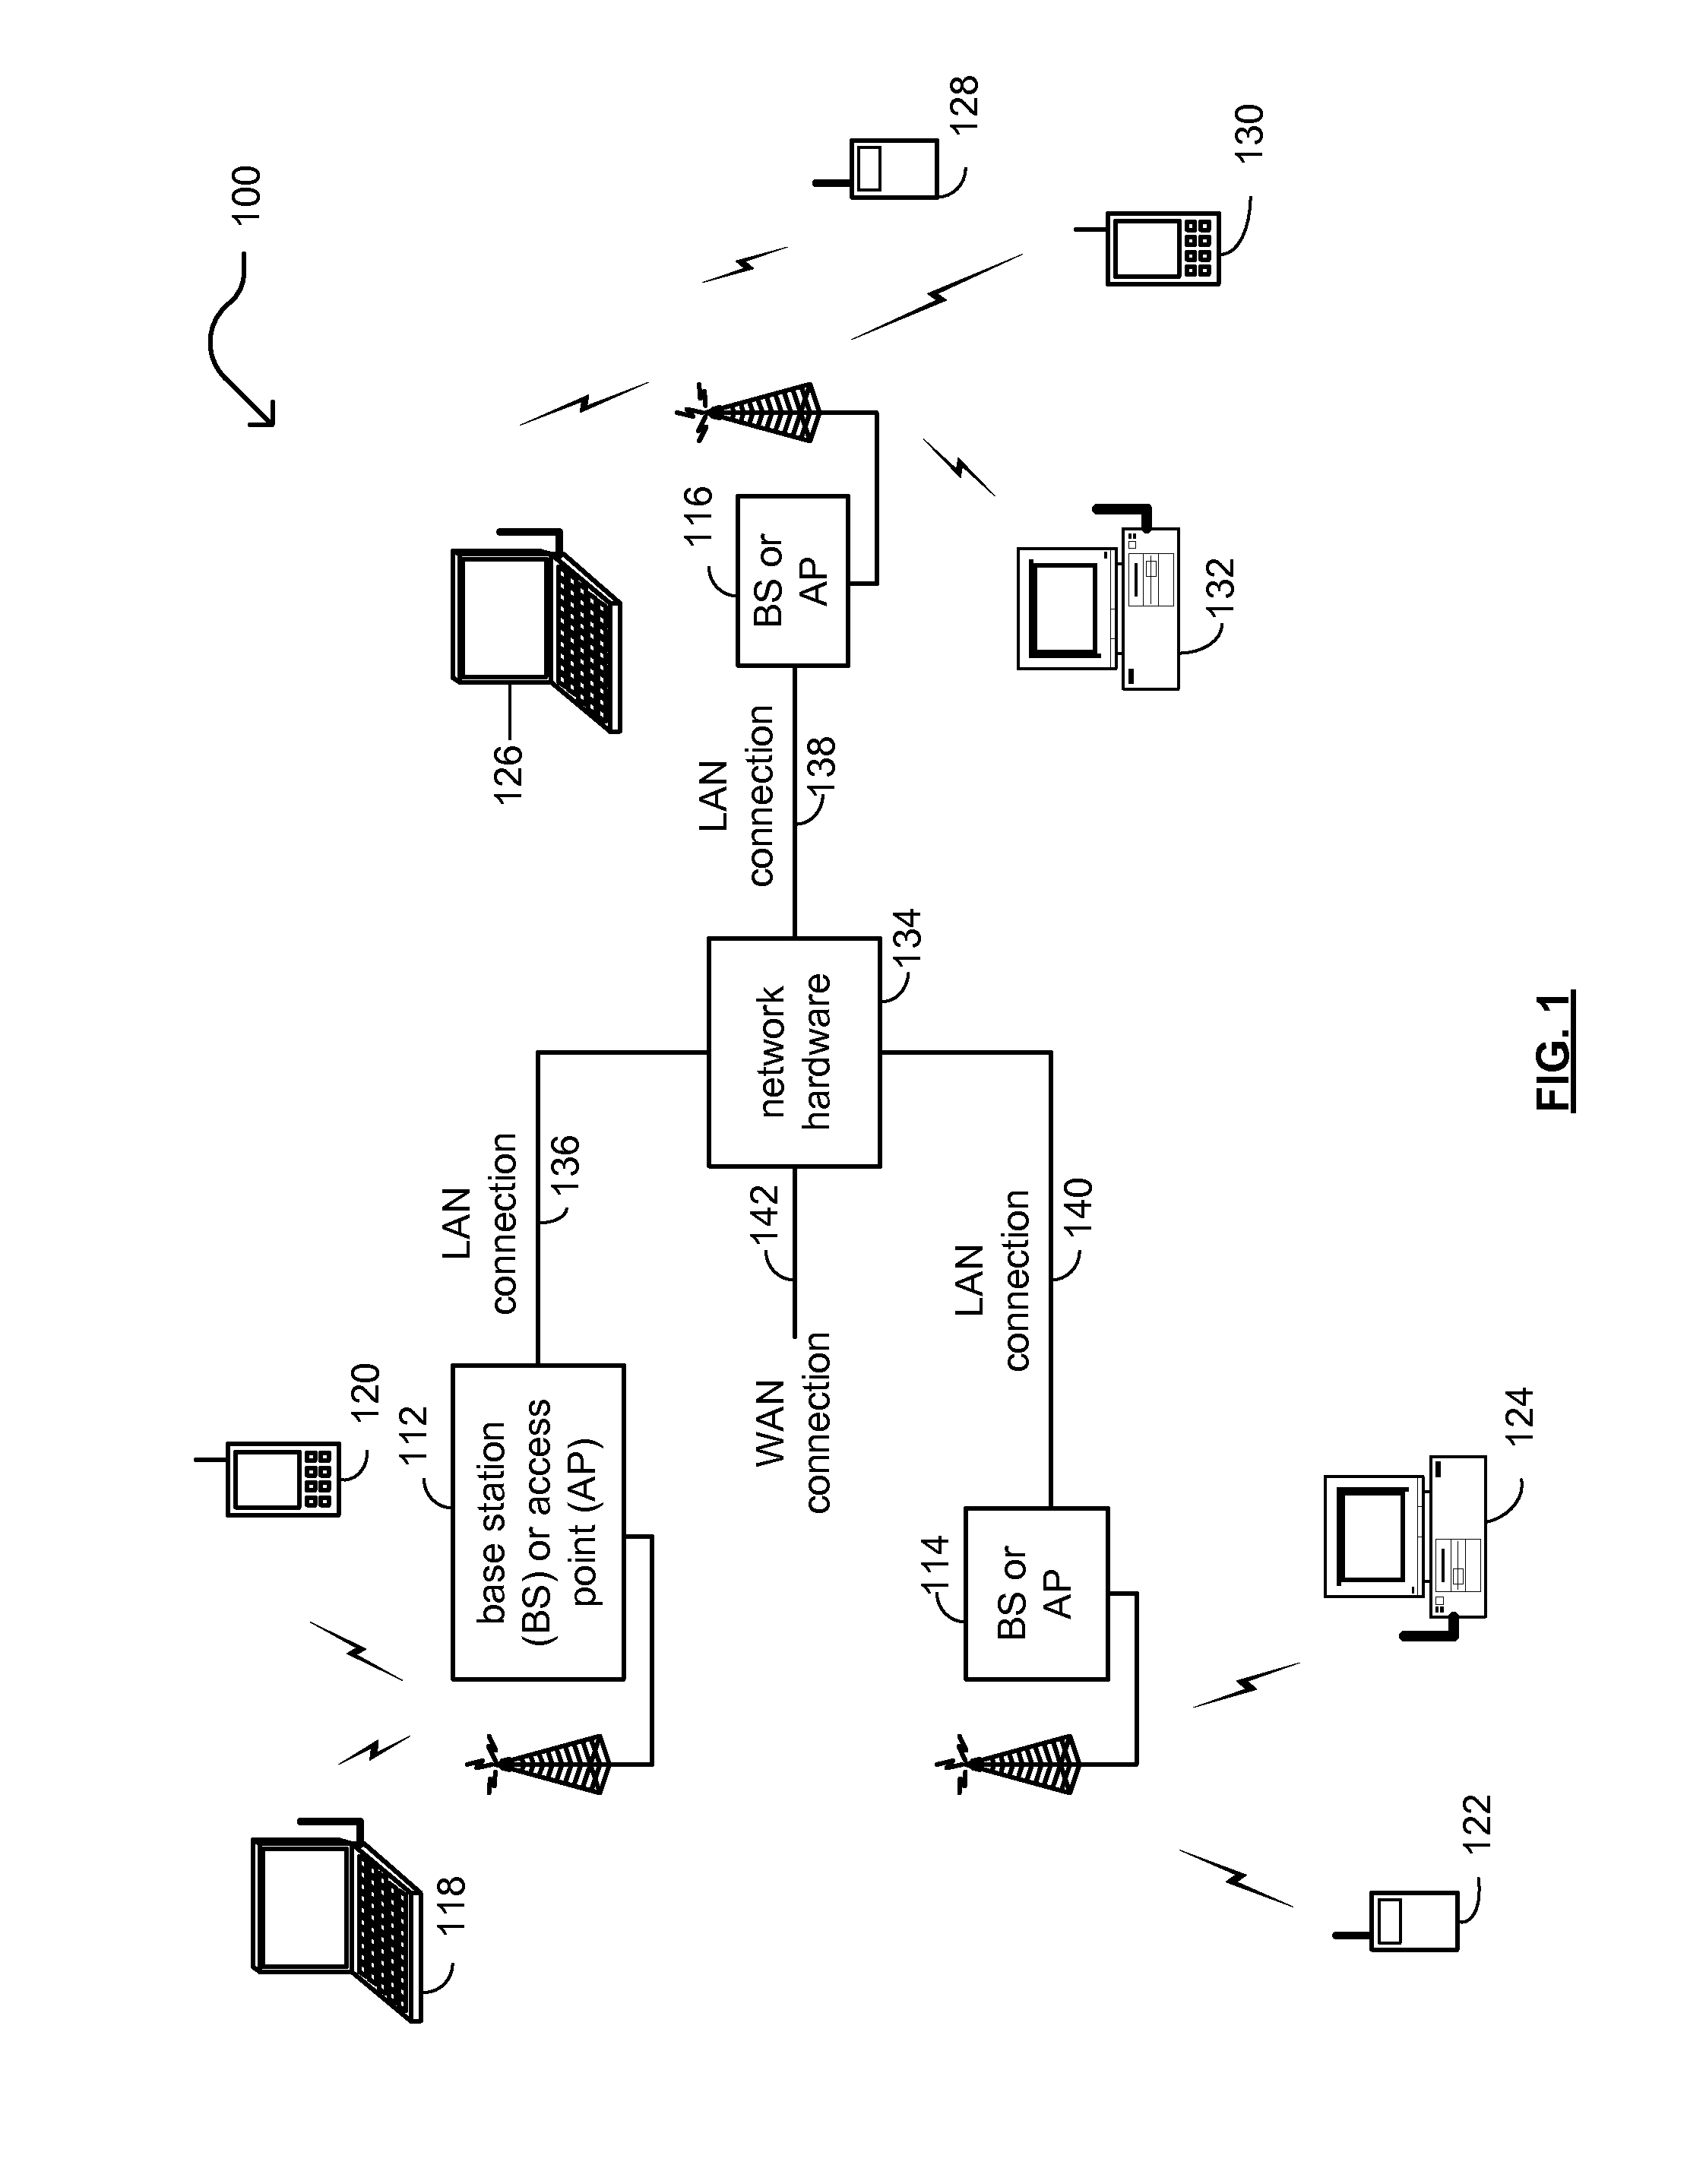 Orthogonal frequency division multiple access (OFDMA) and duplication signaling within wireless communications